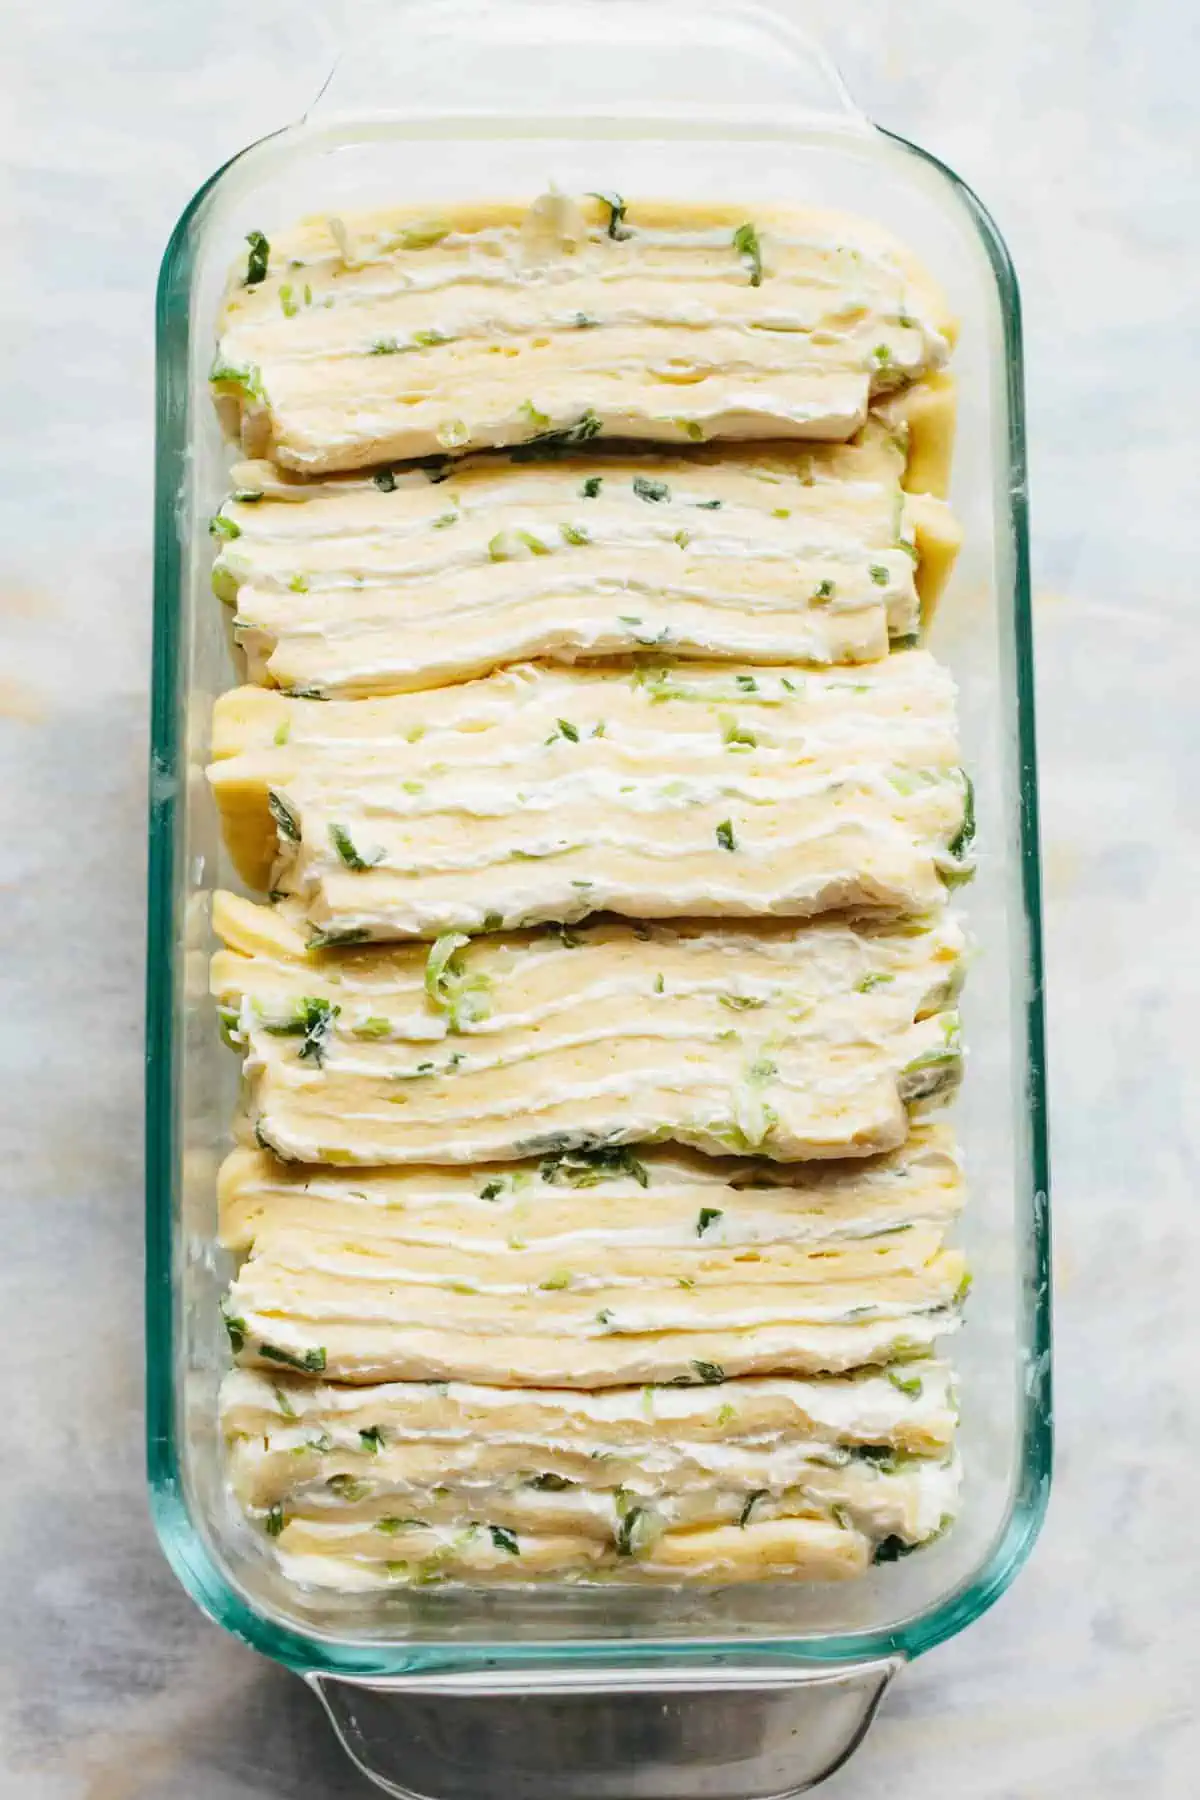 Pre-baked pull apart bread dough and cream cheese layered vertically in a glass loaf pan.